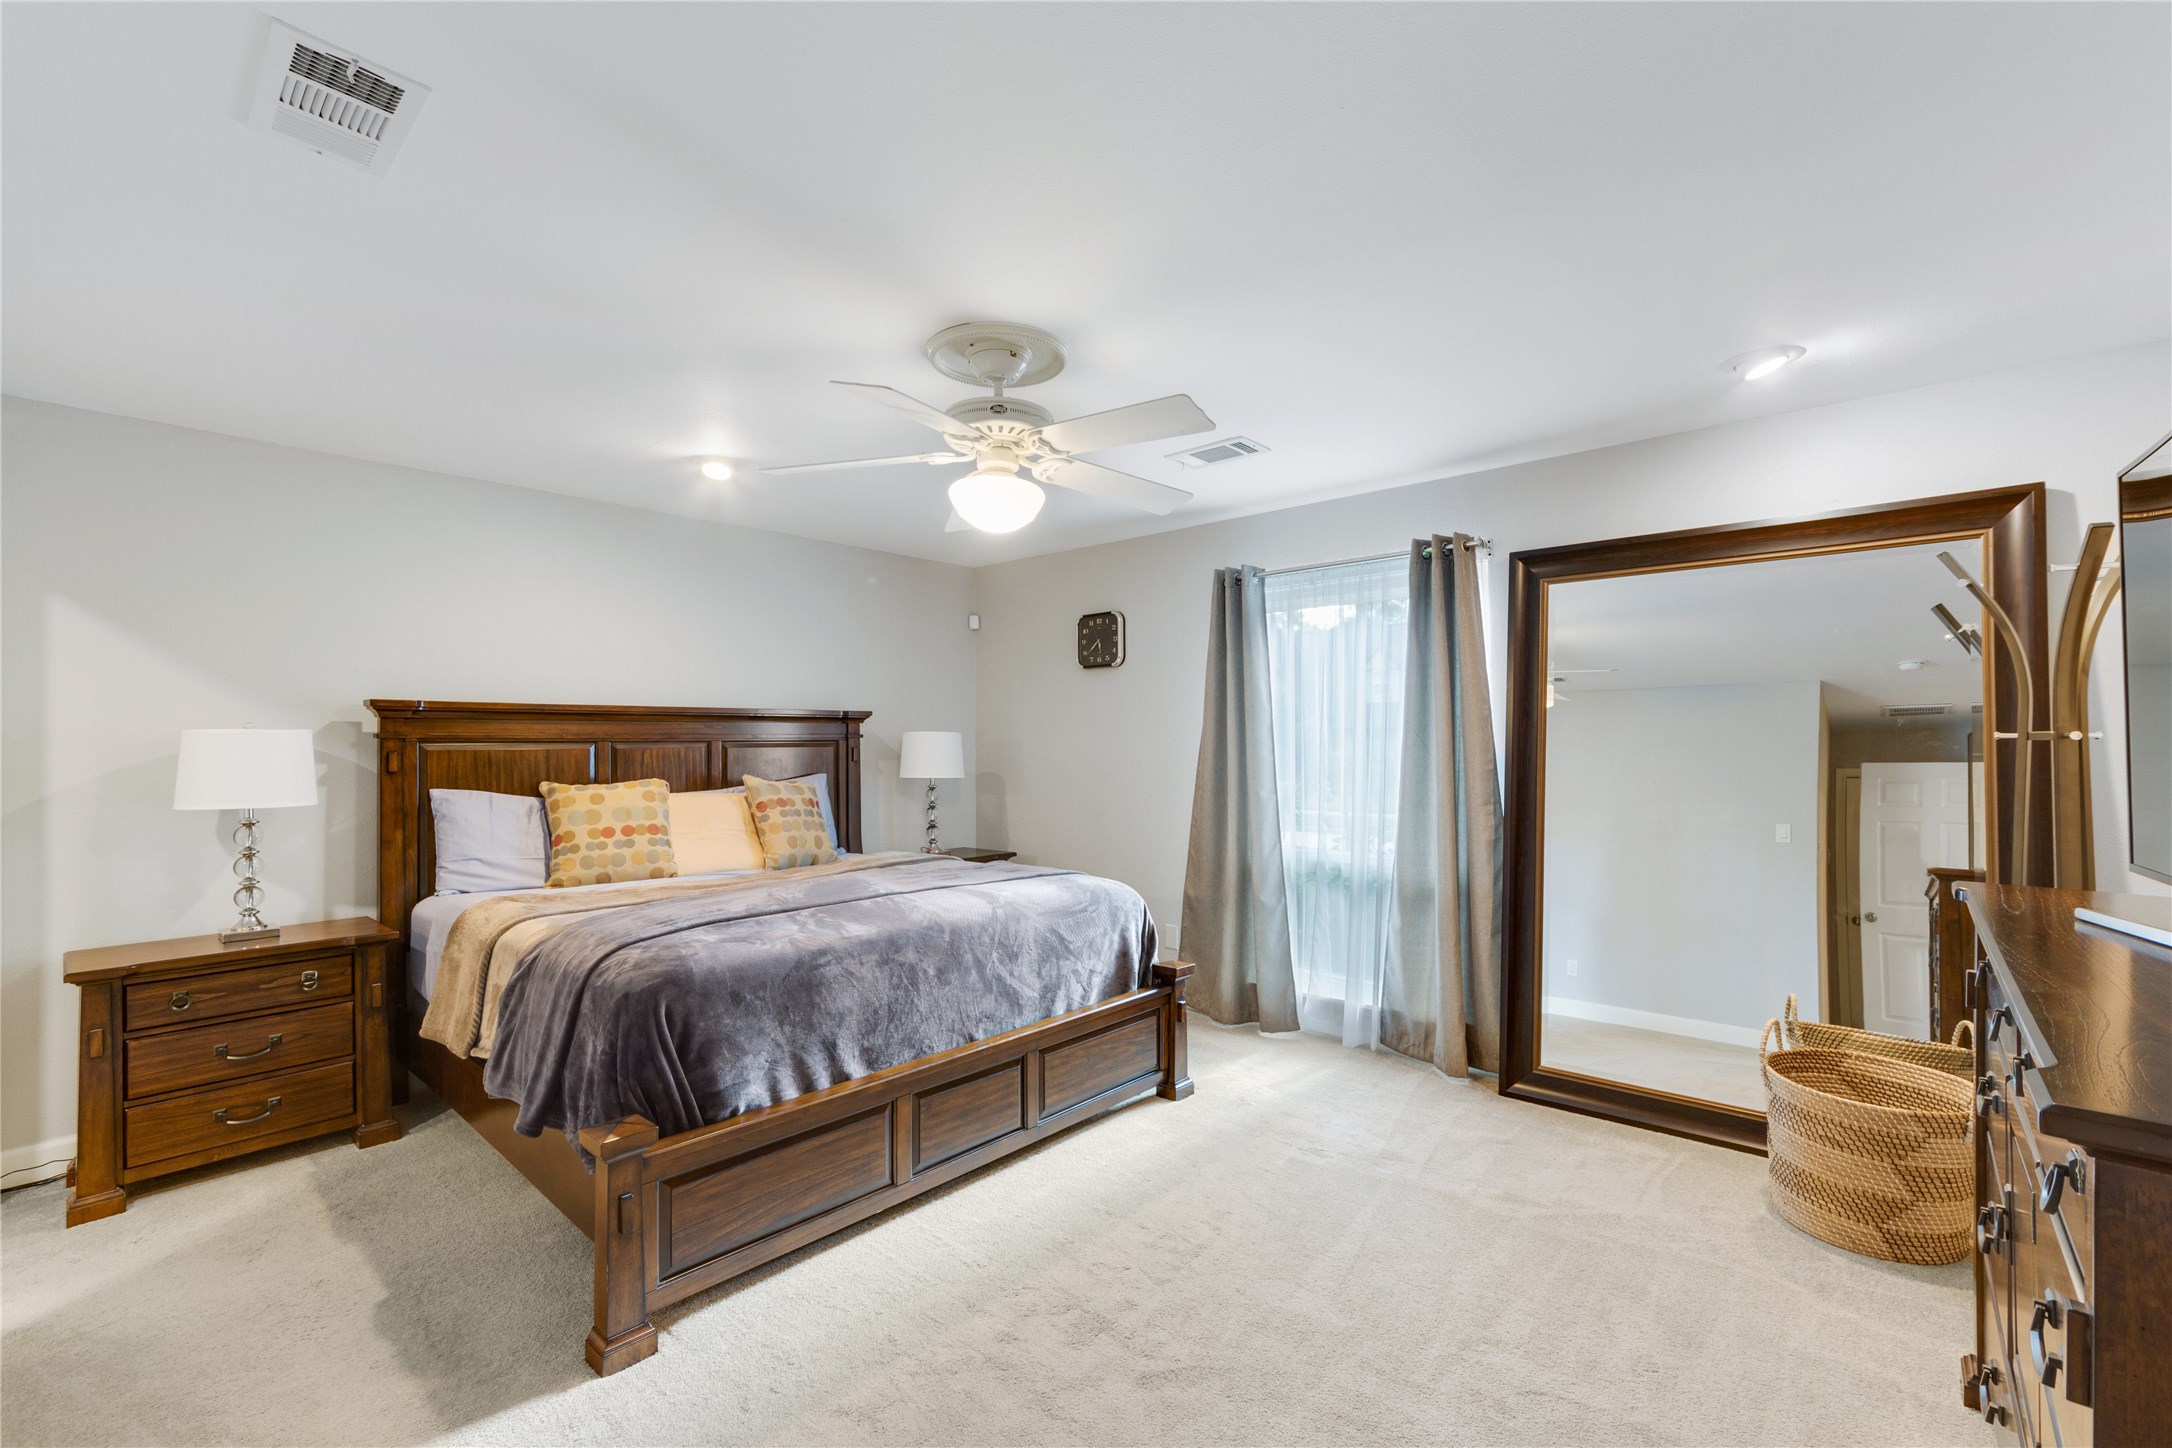 The very spacious master suite is isolated from the other rooms and located in the front of the home.